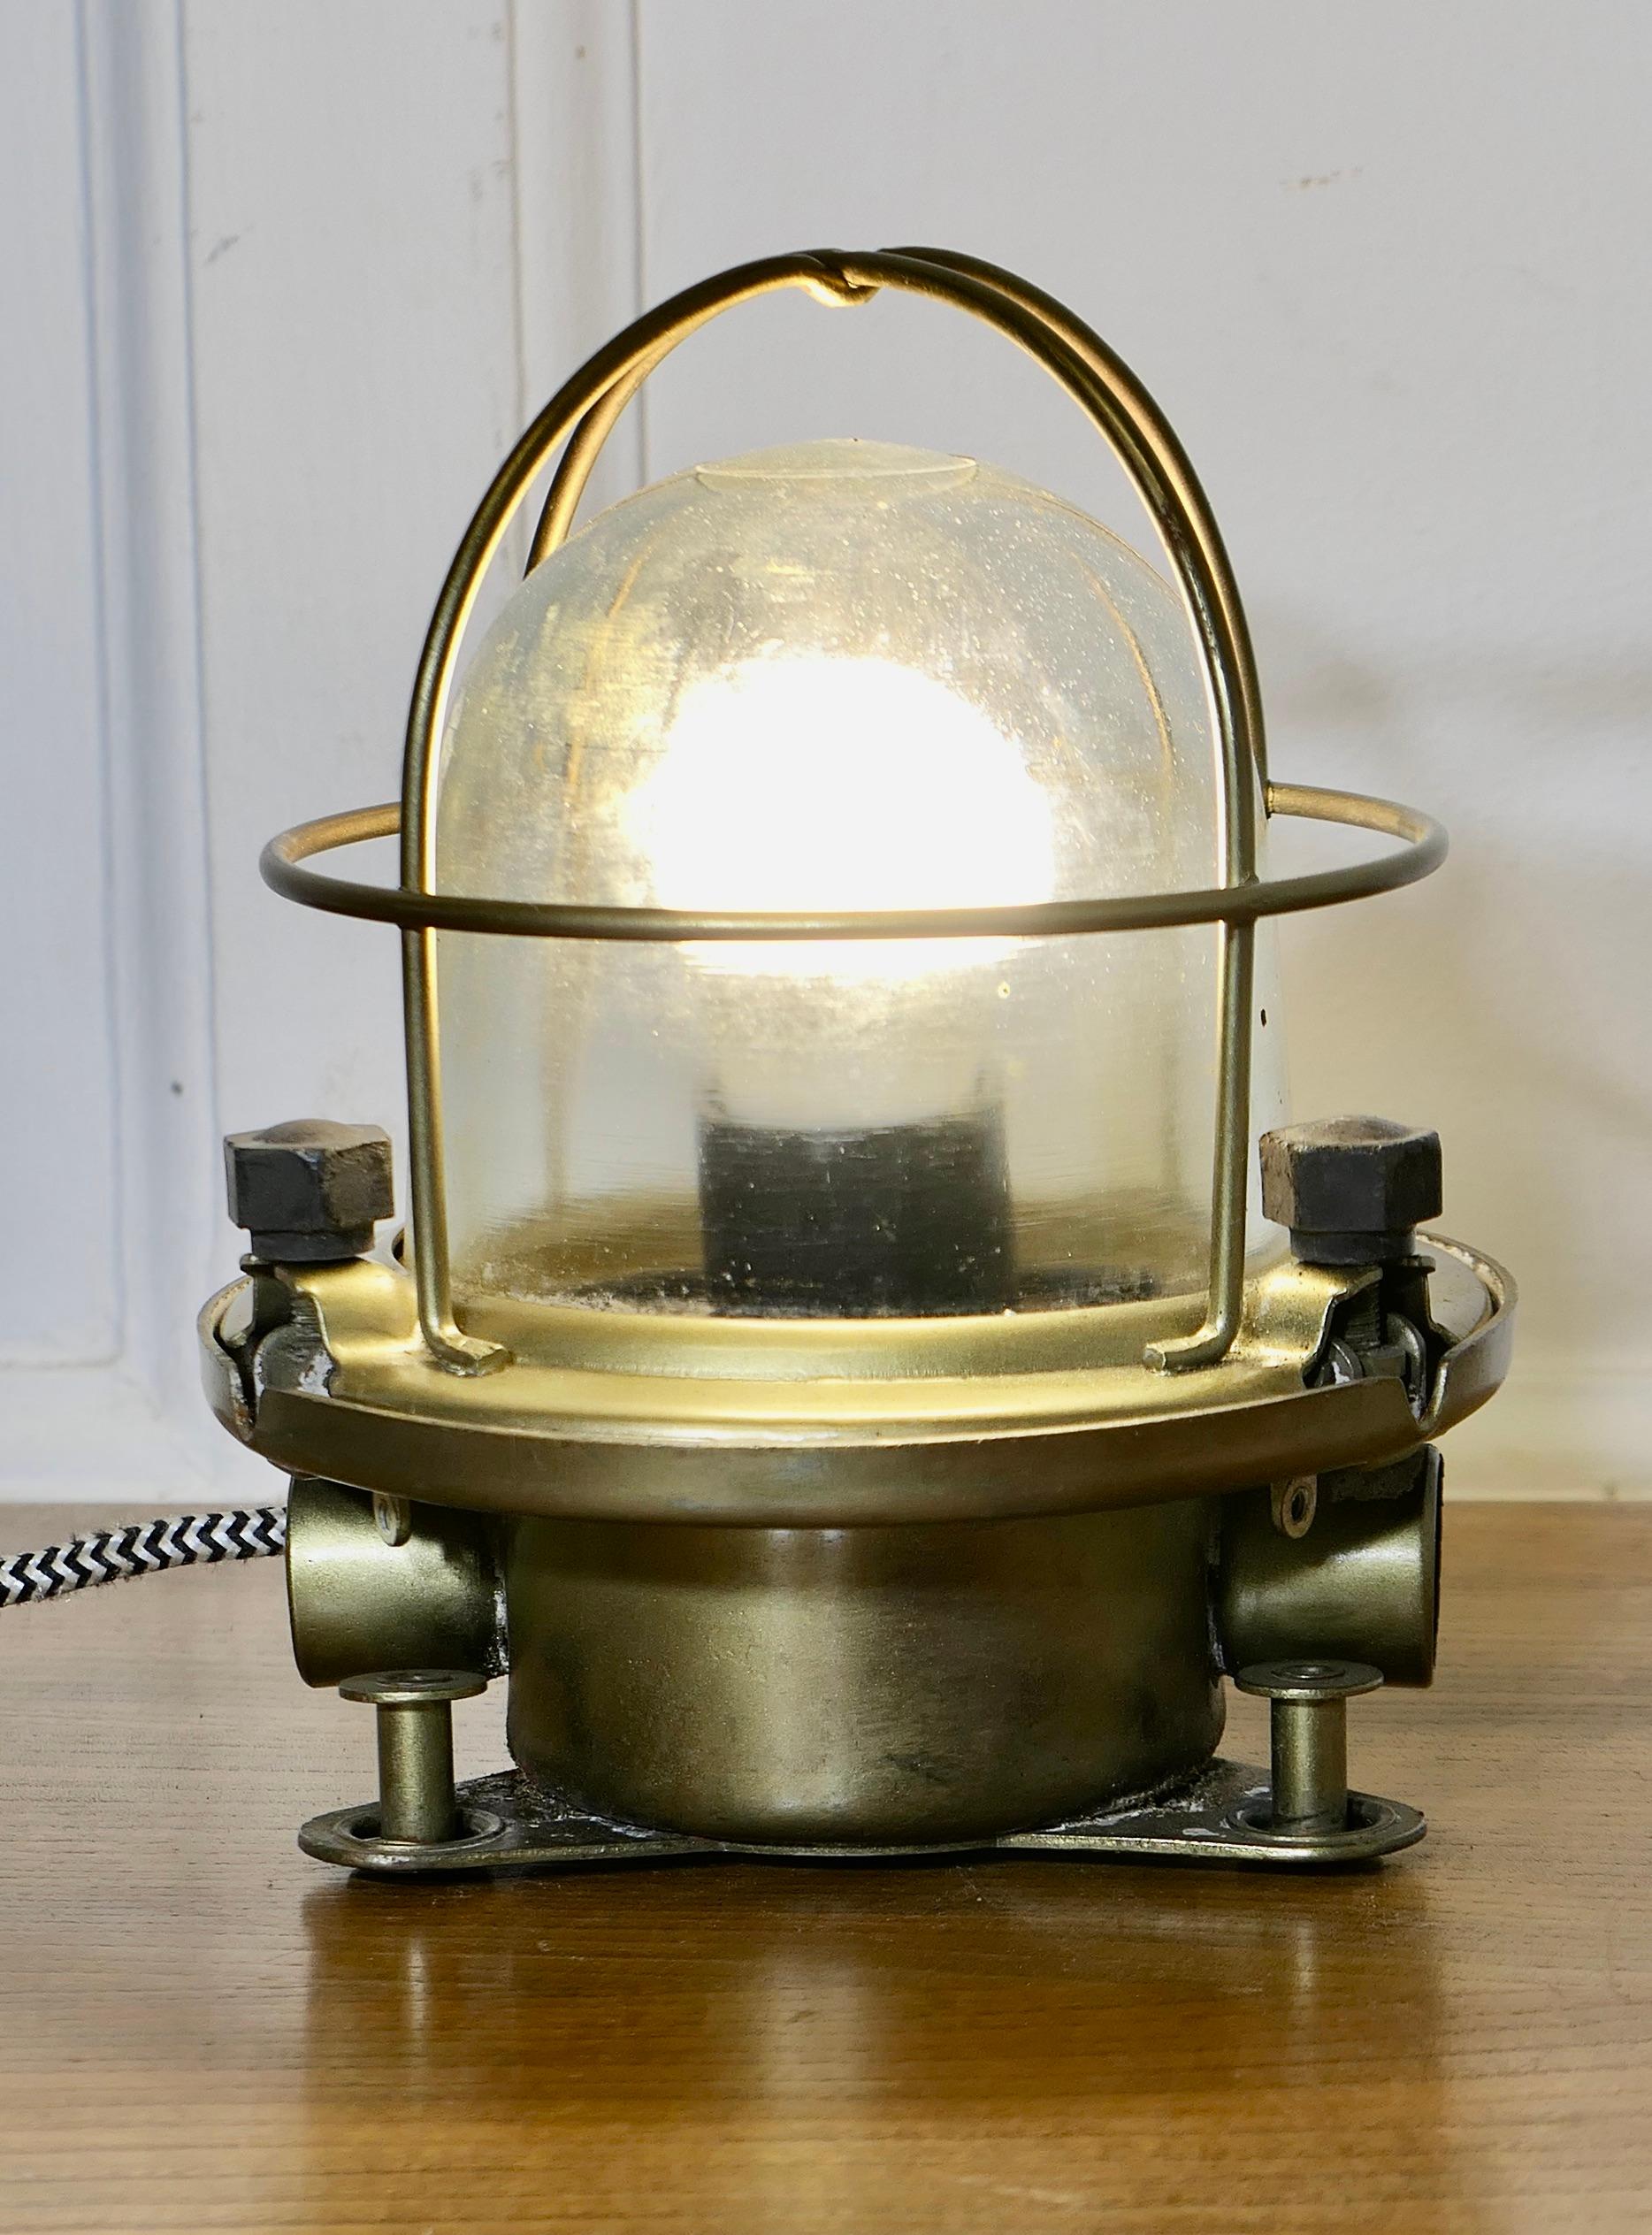 Vintage Nautical Brass Bulk Head Light  

The Lamp is made in brass it has been fully restored and rewired, it can be used on a table or fixed to a wall
The Lamp is in very good condition, rewired and restored just to mention there are flaws in the